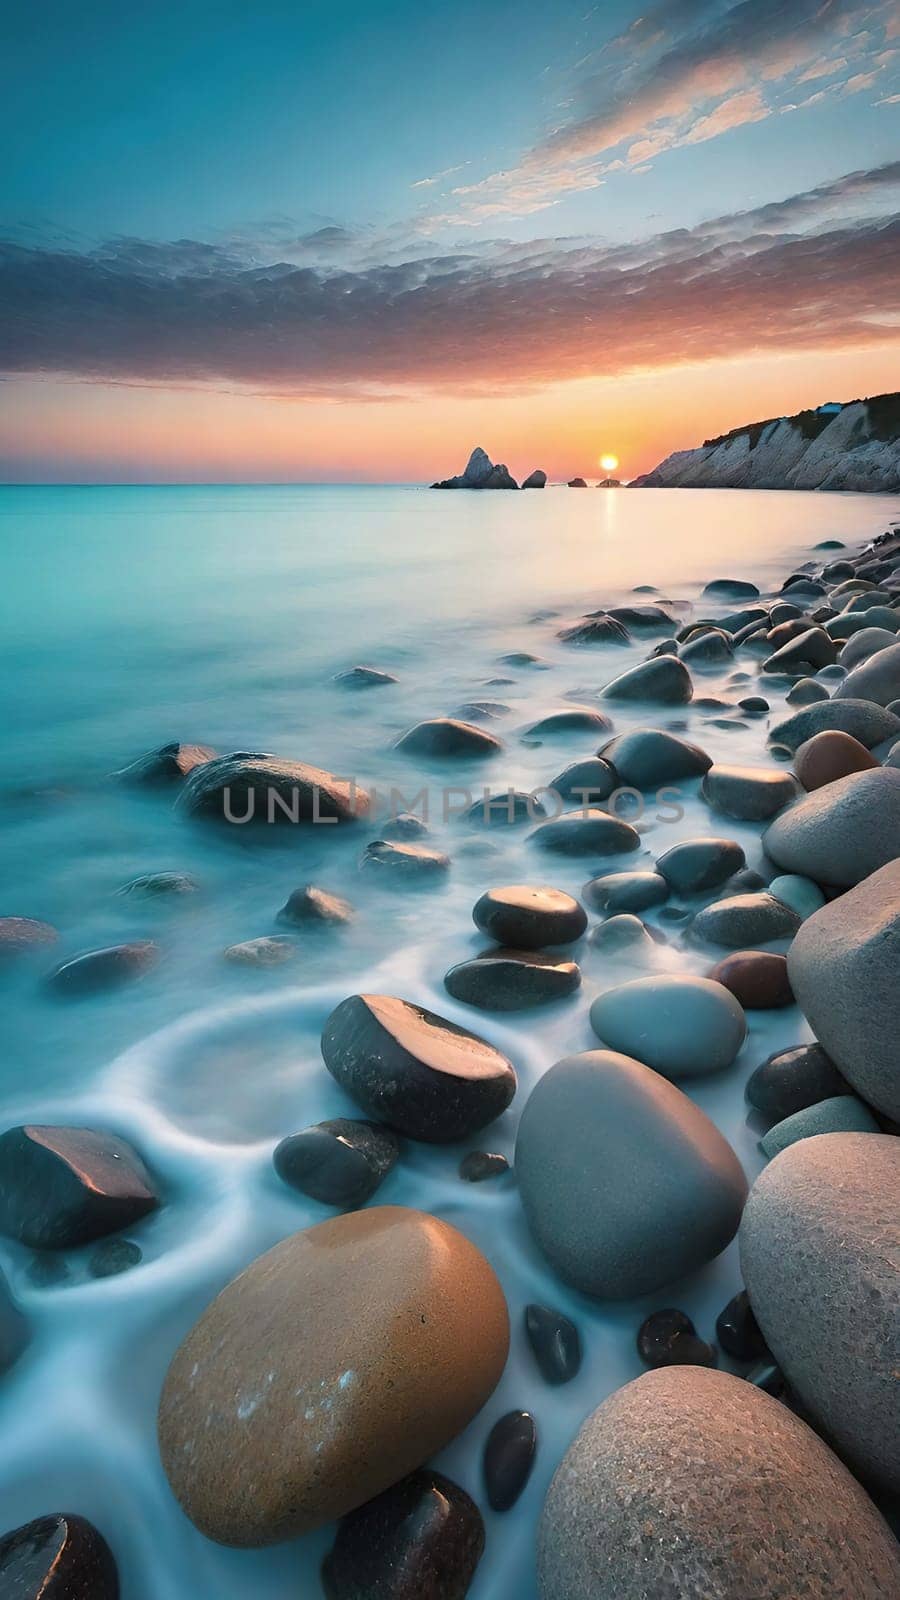 Beautiful seascape at sunset. Composition of nature.Beautiful sunset over the sea. Colorful summer landscape. Long exposure.Beautiful seascape with pebbles on the beach at sunset.